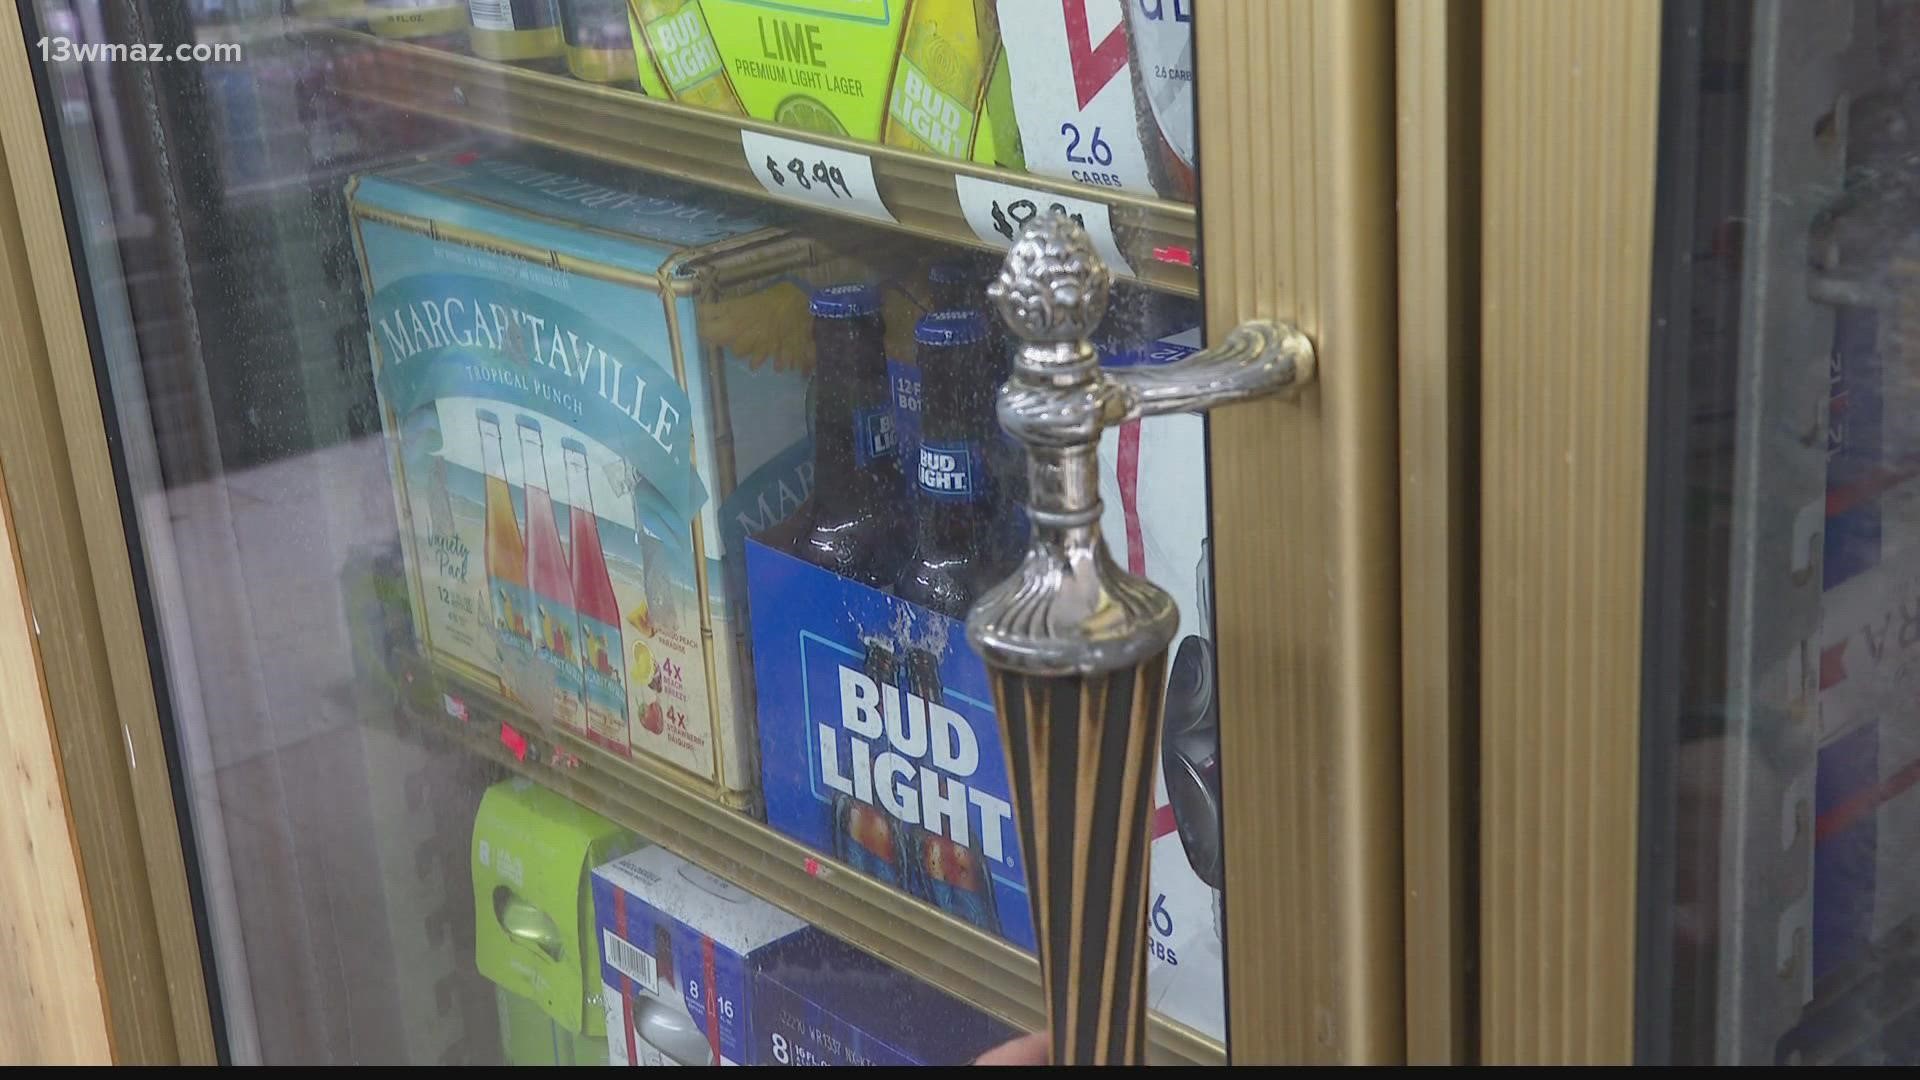 Jones County Sheriff's Office is cracking down on selling alcohol to minors. This week, deputies performed a compliance check to stores with alcohol licenses.